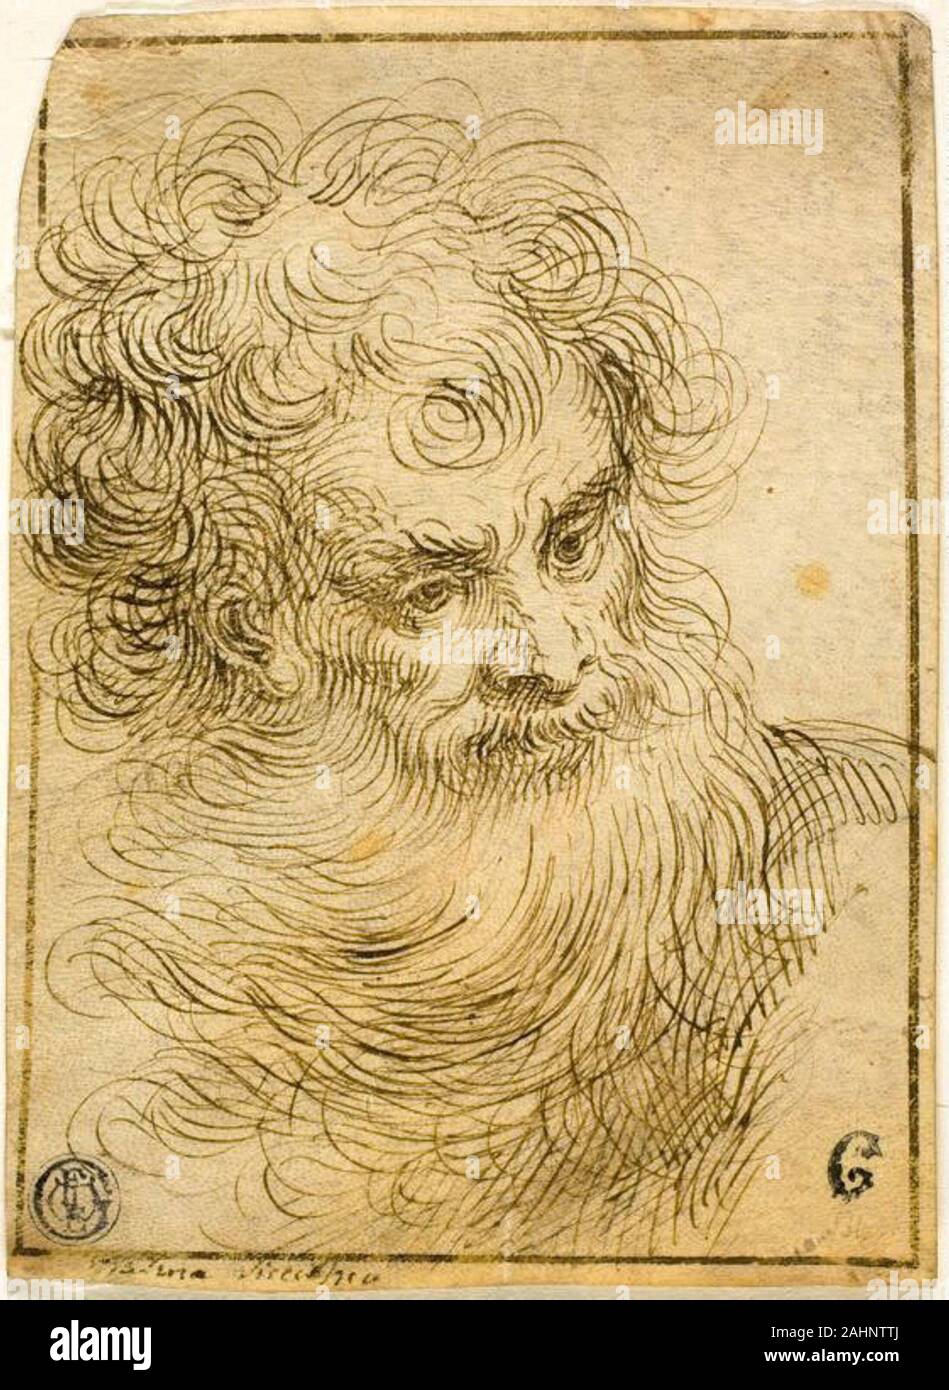 jacopo negretti called palma il giovane head of bearded old man recto decorative sketch of flower and leaves verso 16001799 italy pen and brown ink recto and verso on vellum 2AHNTTJ